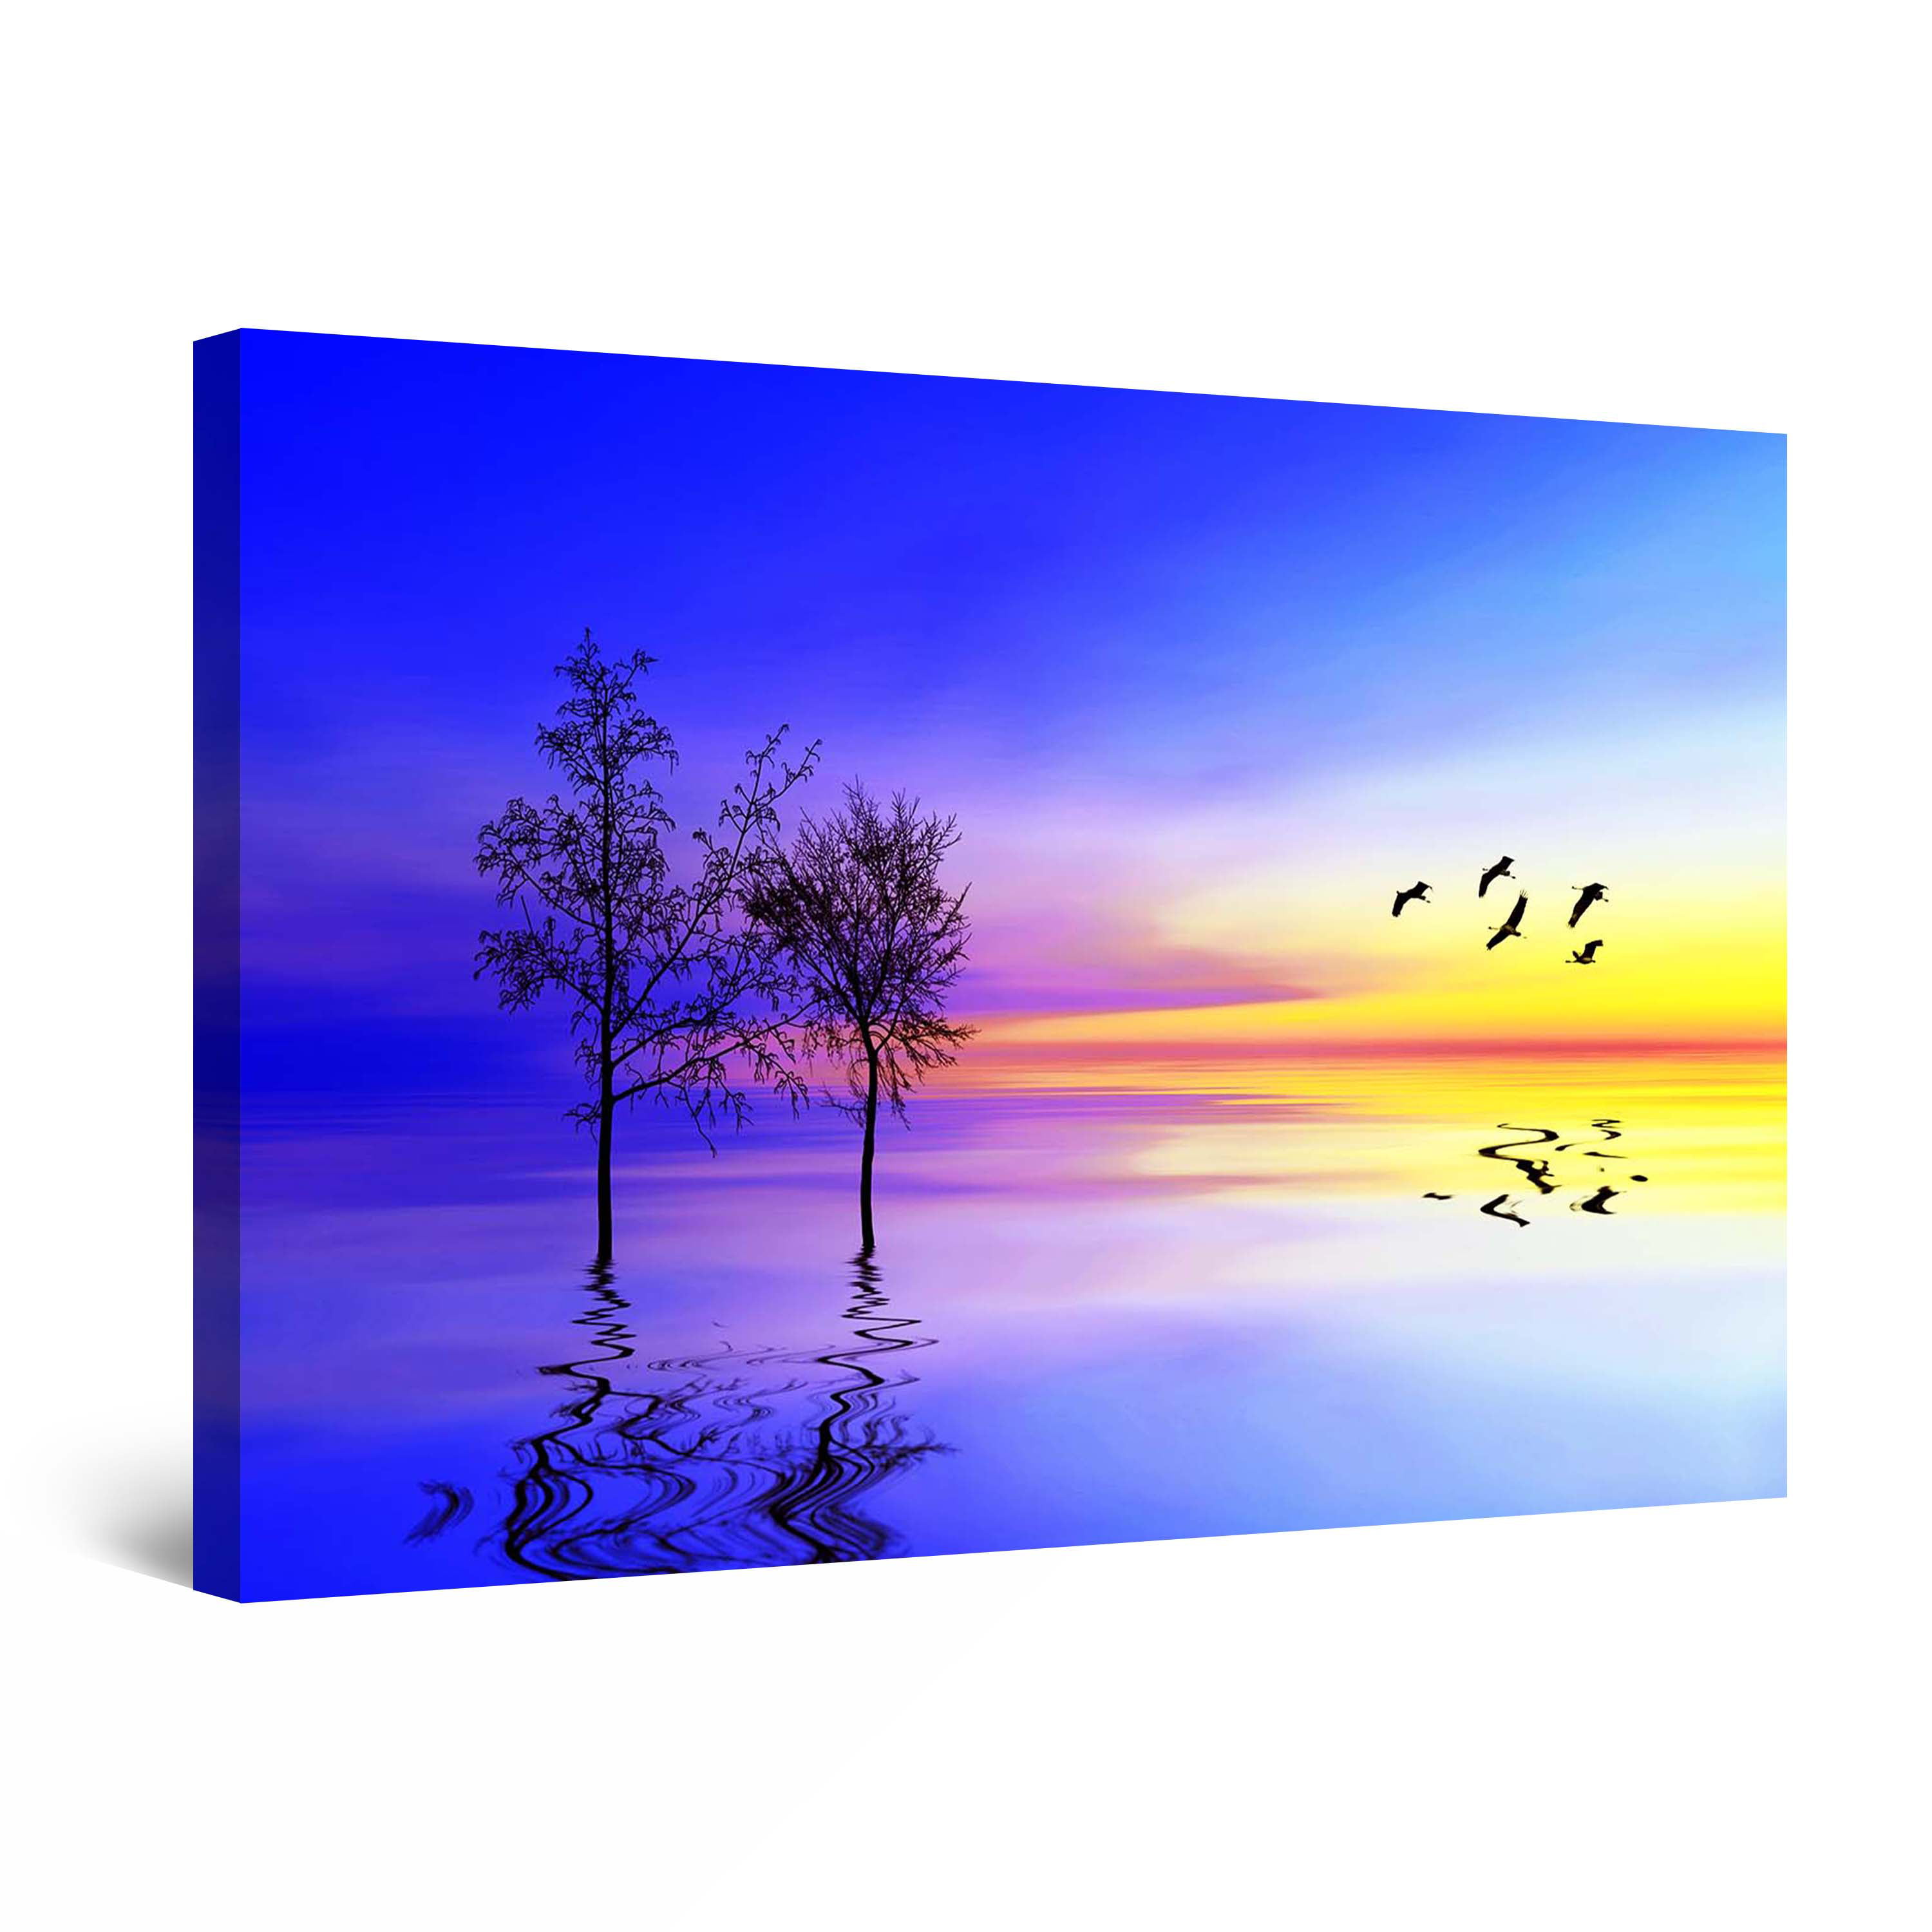 Details about   SUNSET WINDOWS PICTURE PRINT ON FRAMED CANVAS WALL ART PAINTING DECORATION 